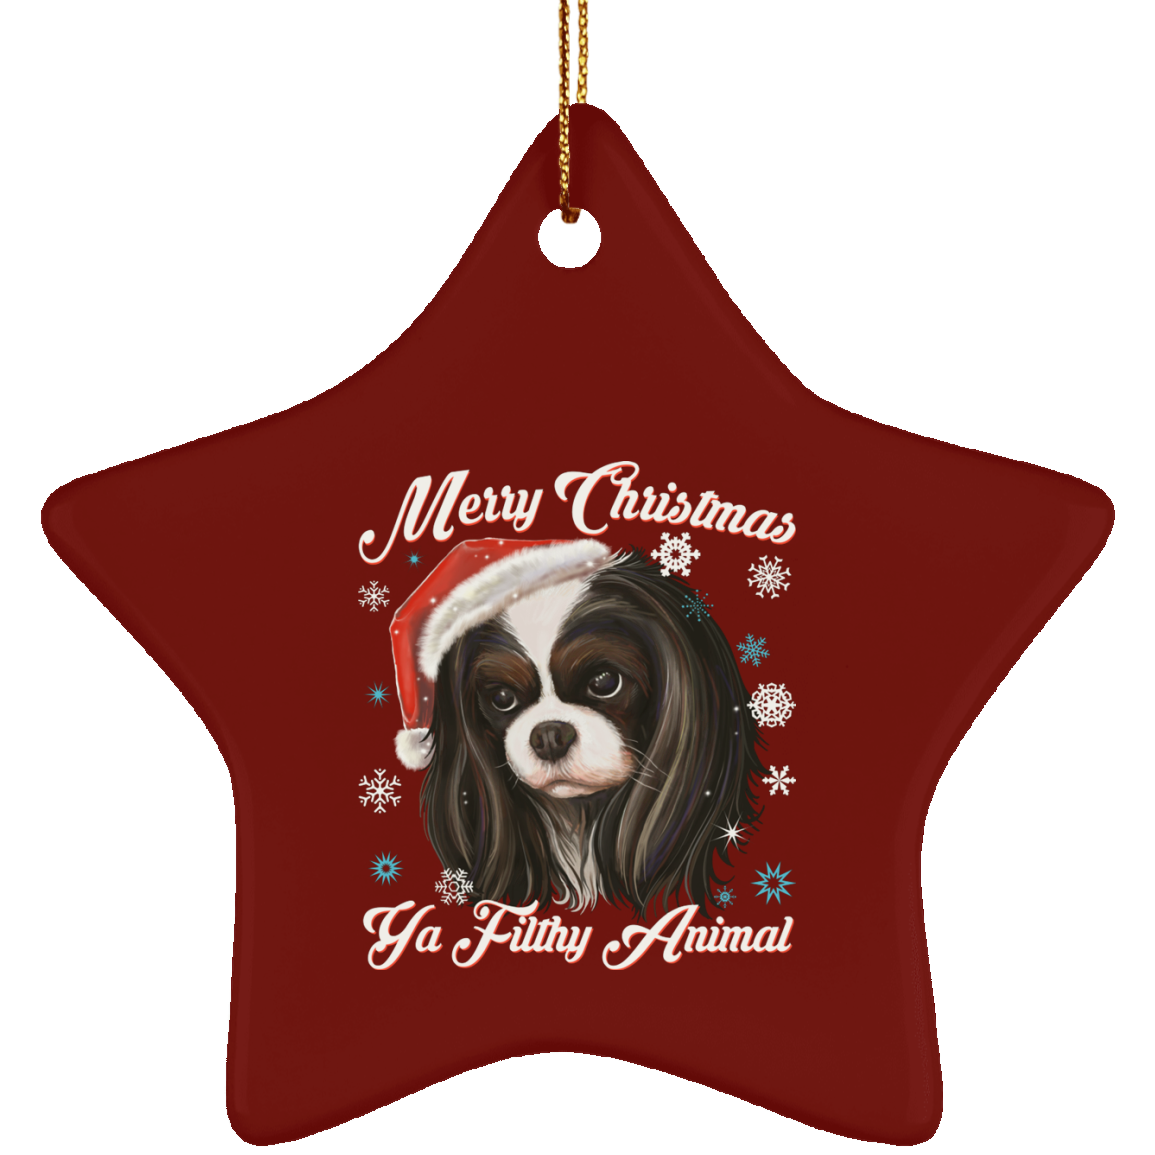 Christmas tree decorations - Cavalier King Charles Spaniel - GoneBold.gift